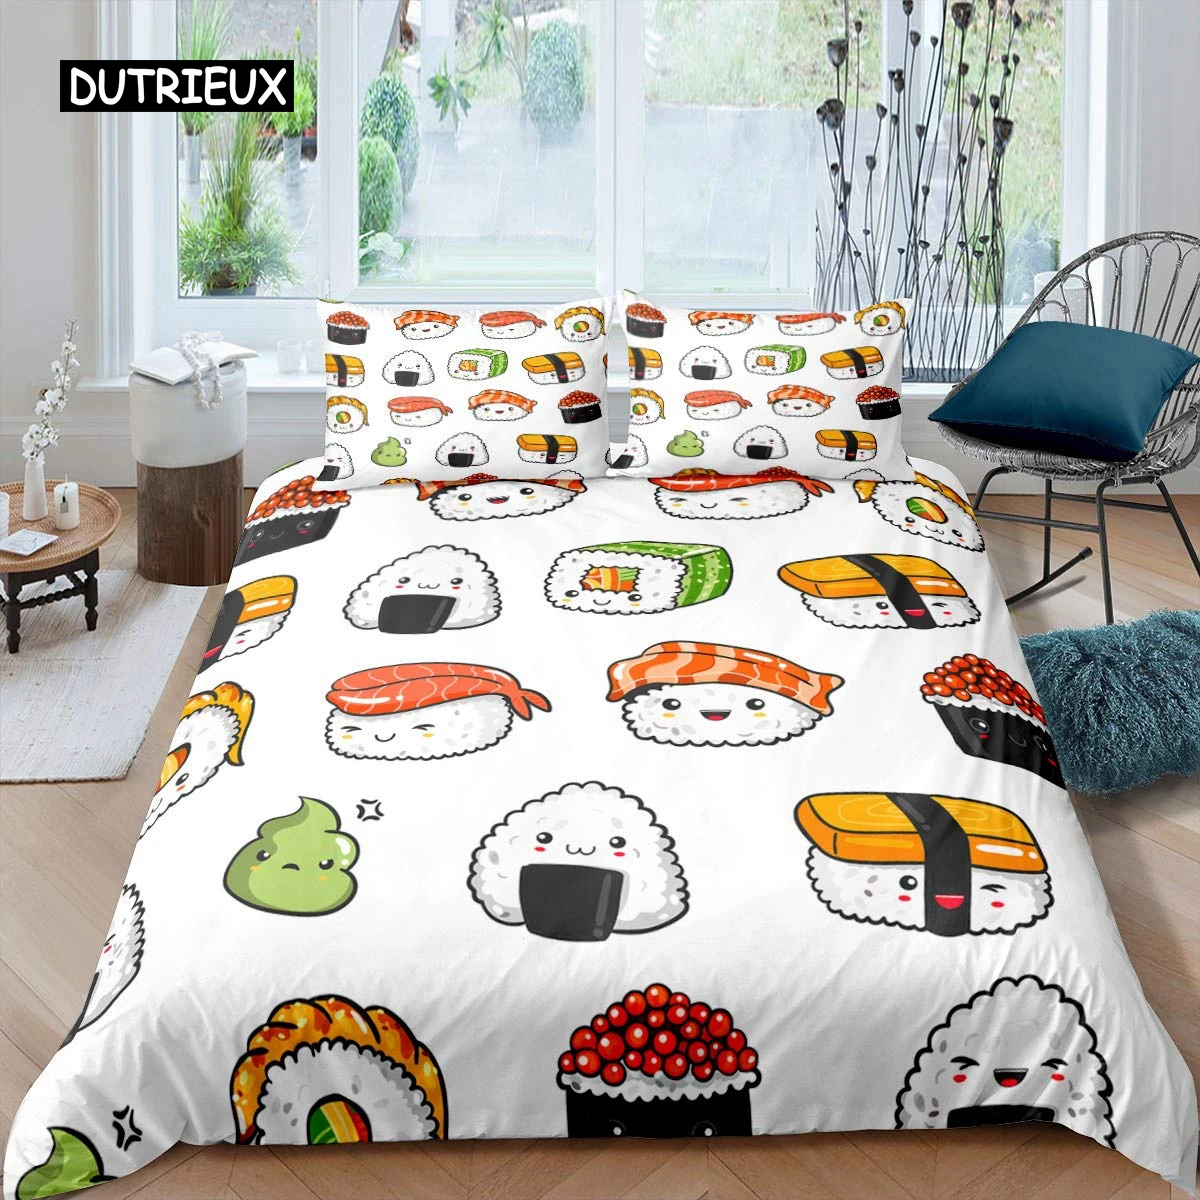 

Sushi Pattern Duvet Cover Set King Microfiber Japanese-Style Comforter Cover Food Theme Cute Cartoon Japanese Sushi Quilt Cover